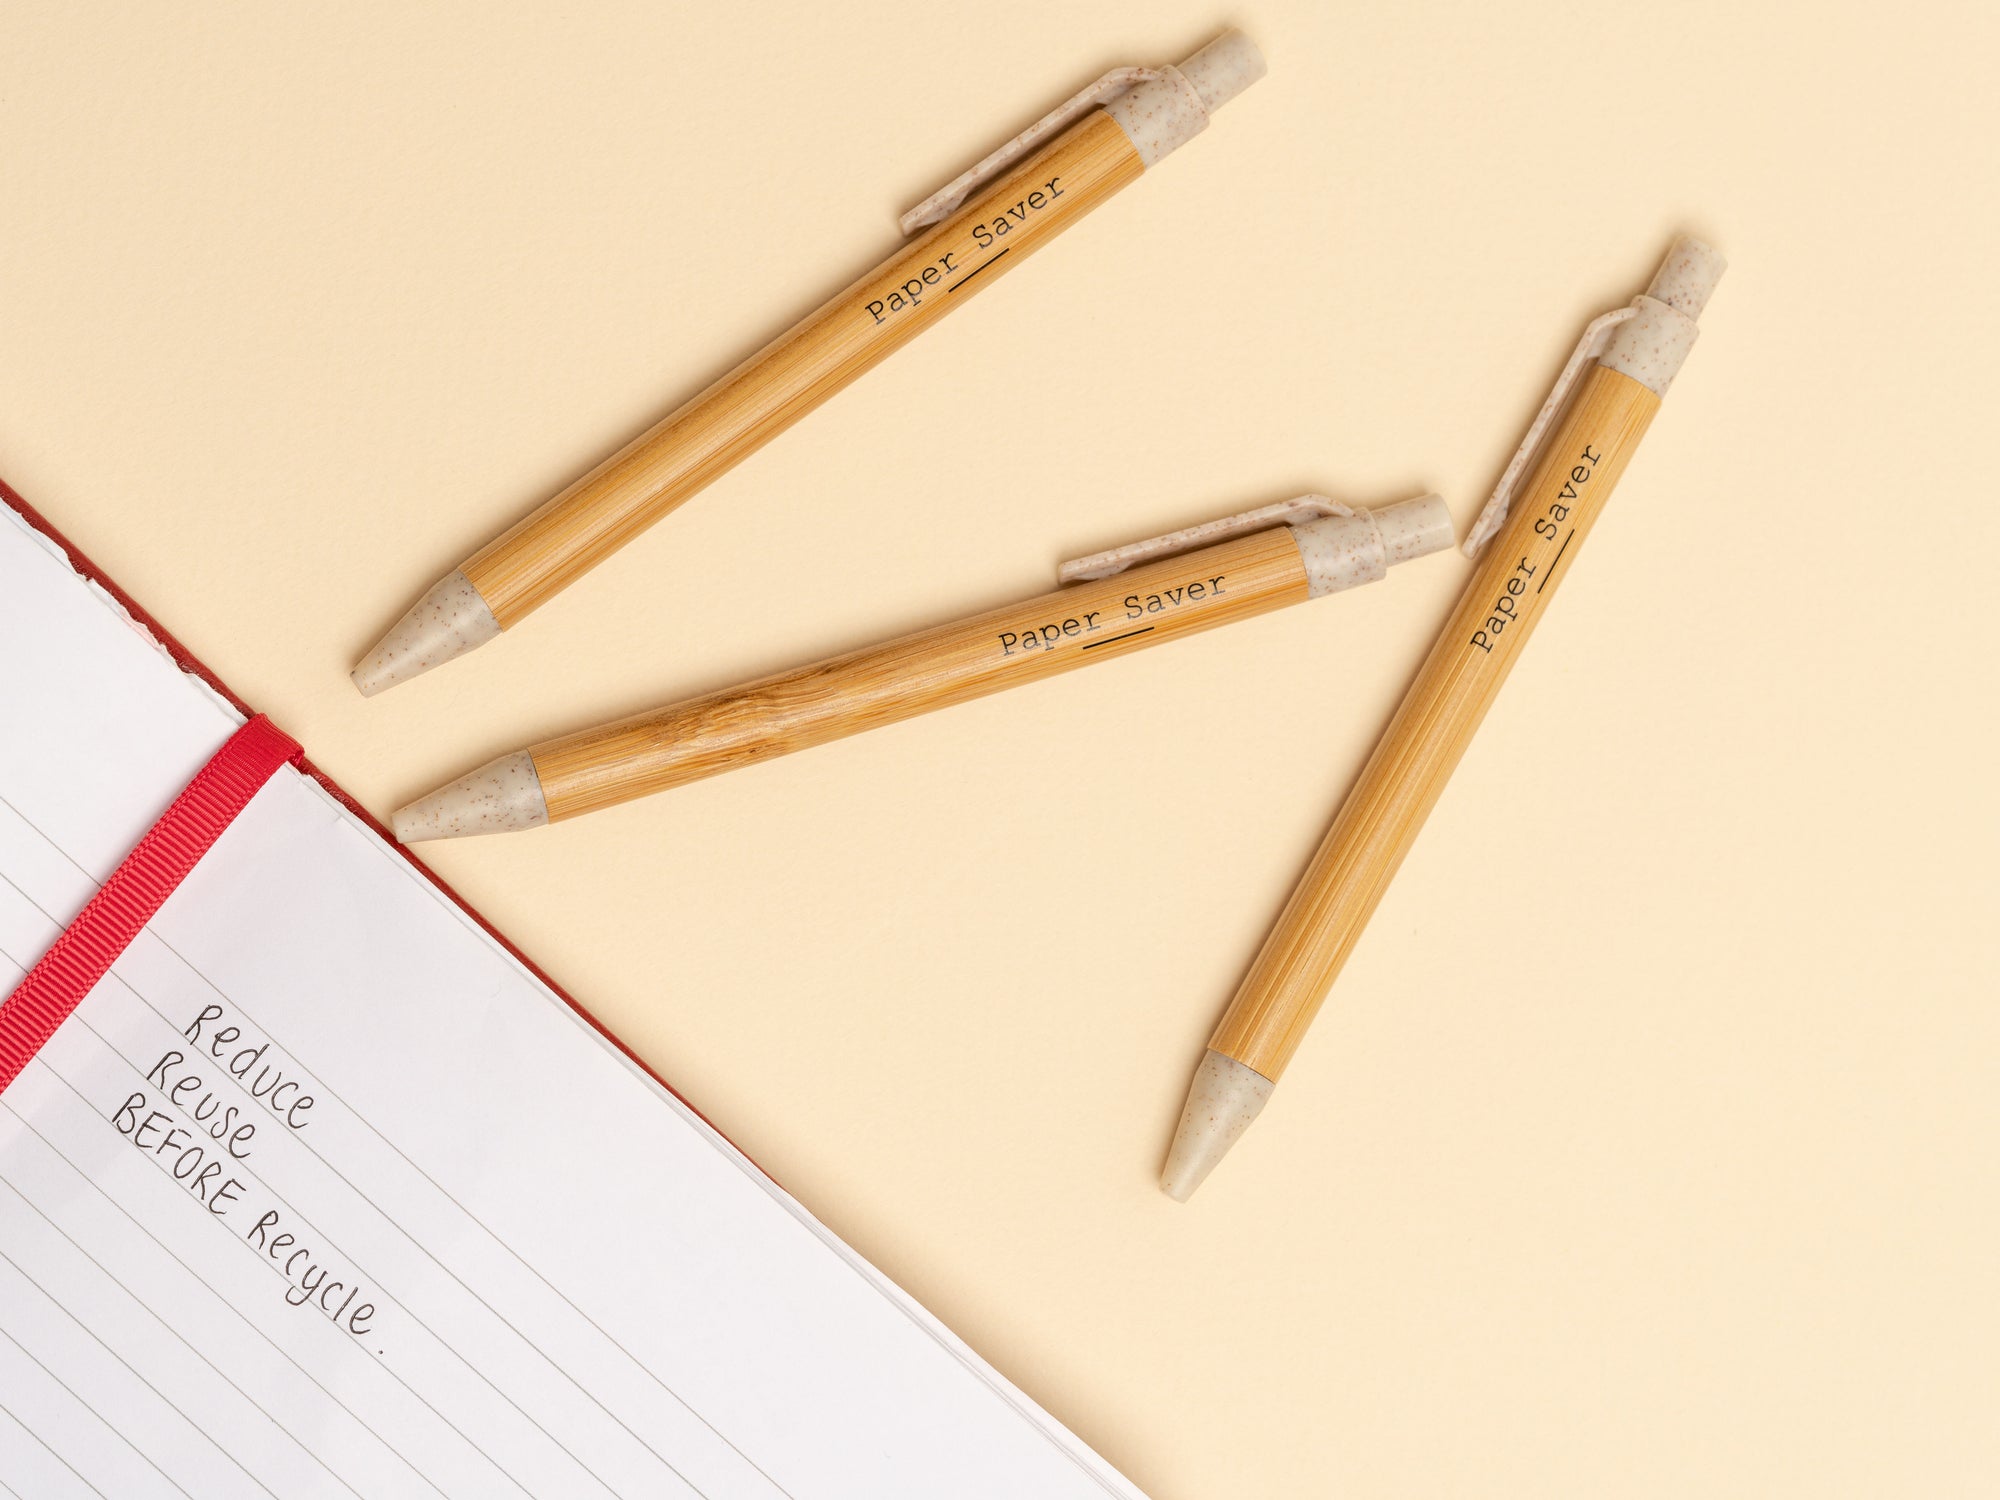 Write with a reusable eco pen made of the sustainable bamboo that you can refill again and again to stop throwing away single-use plastic disposable pens!